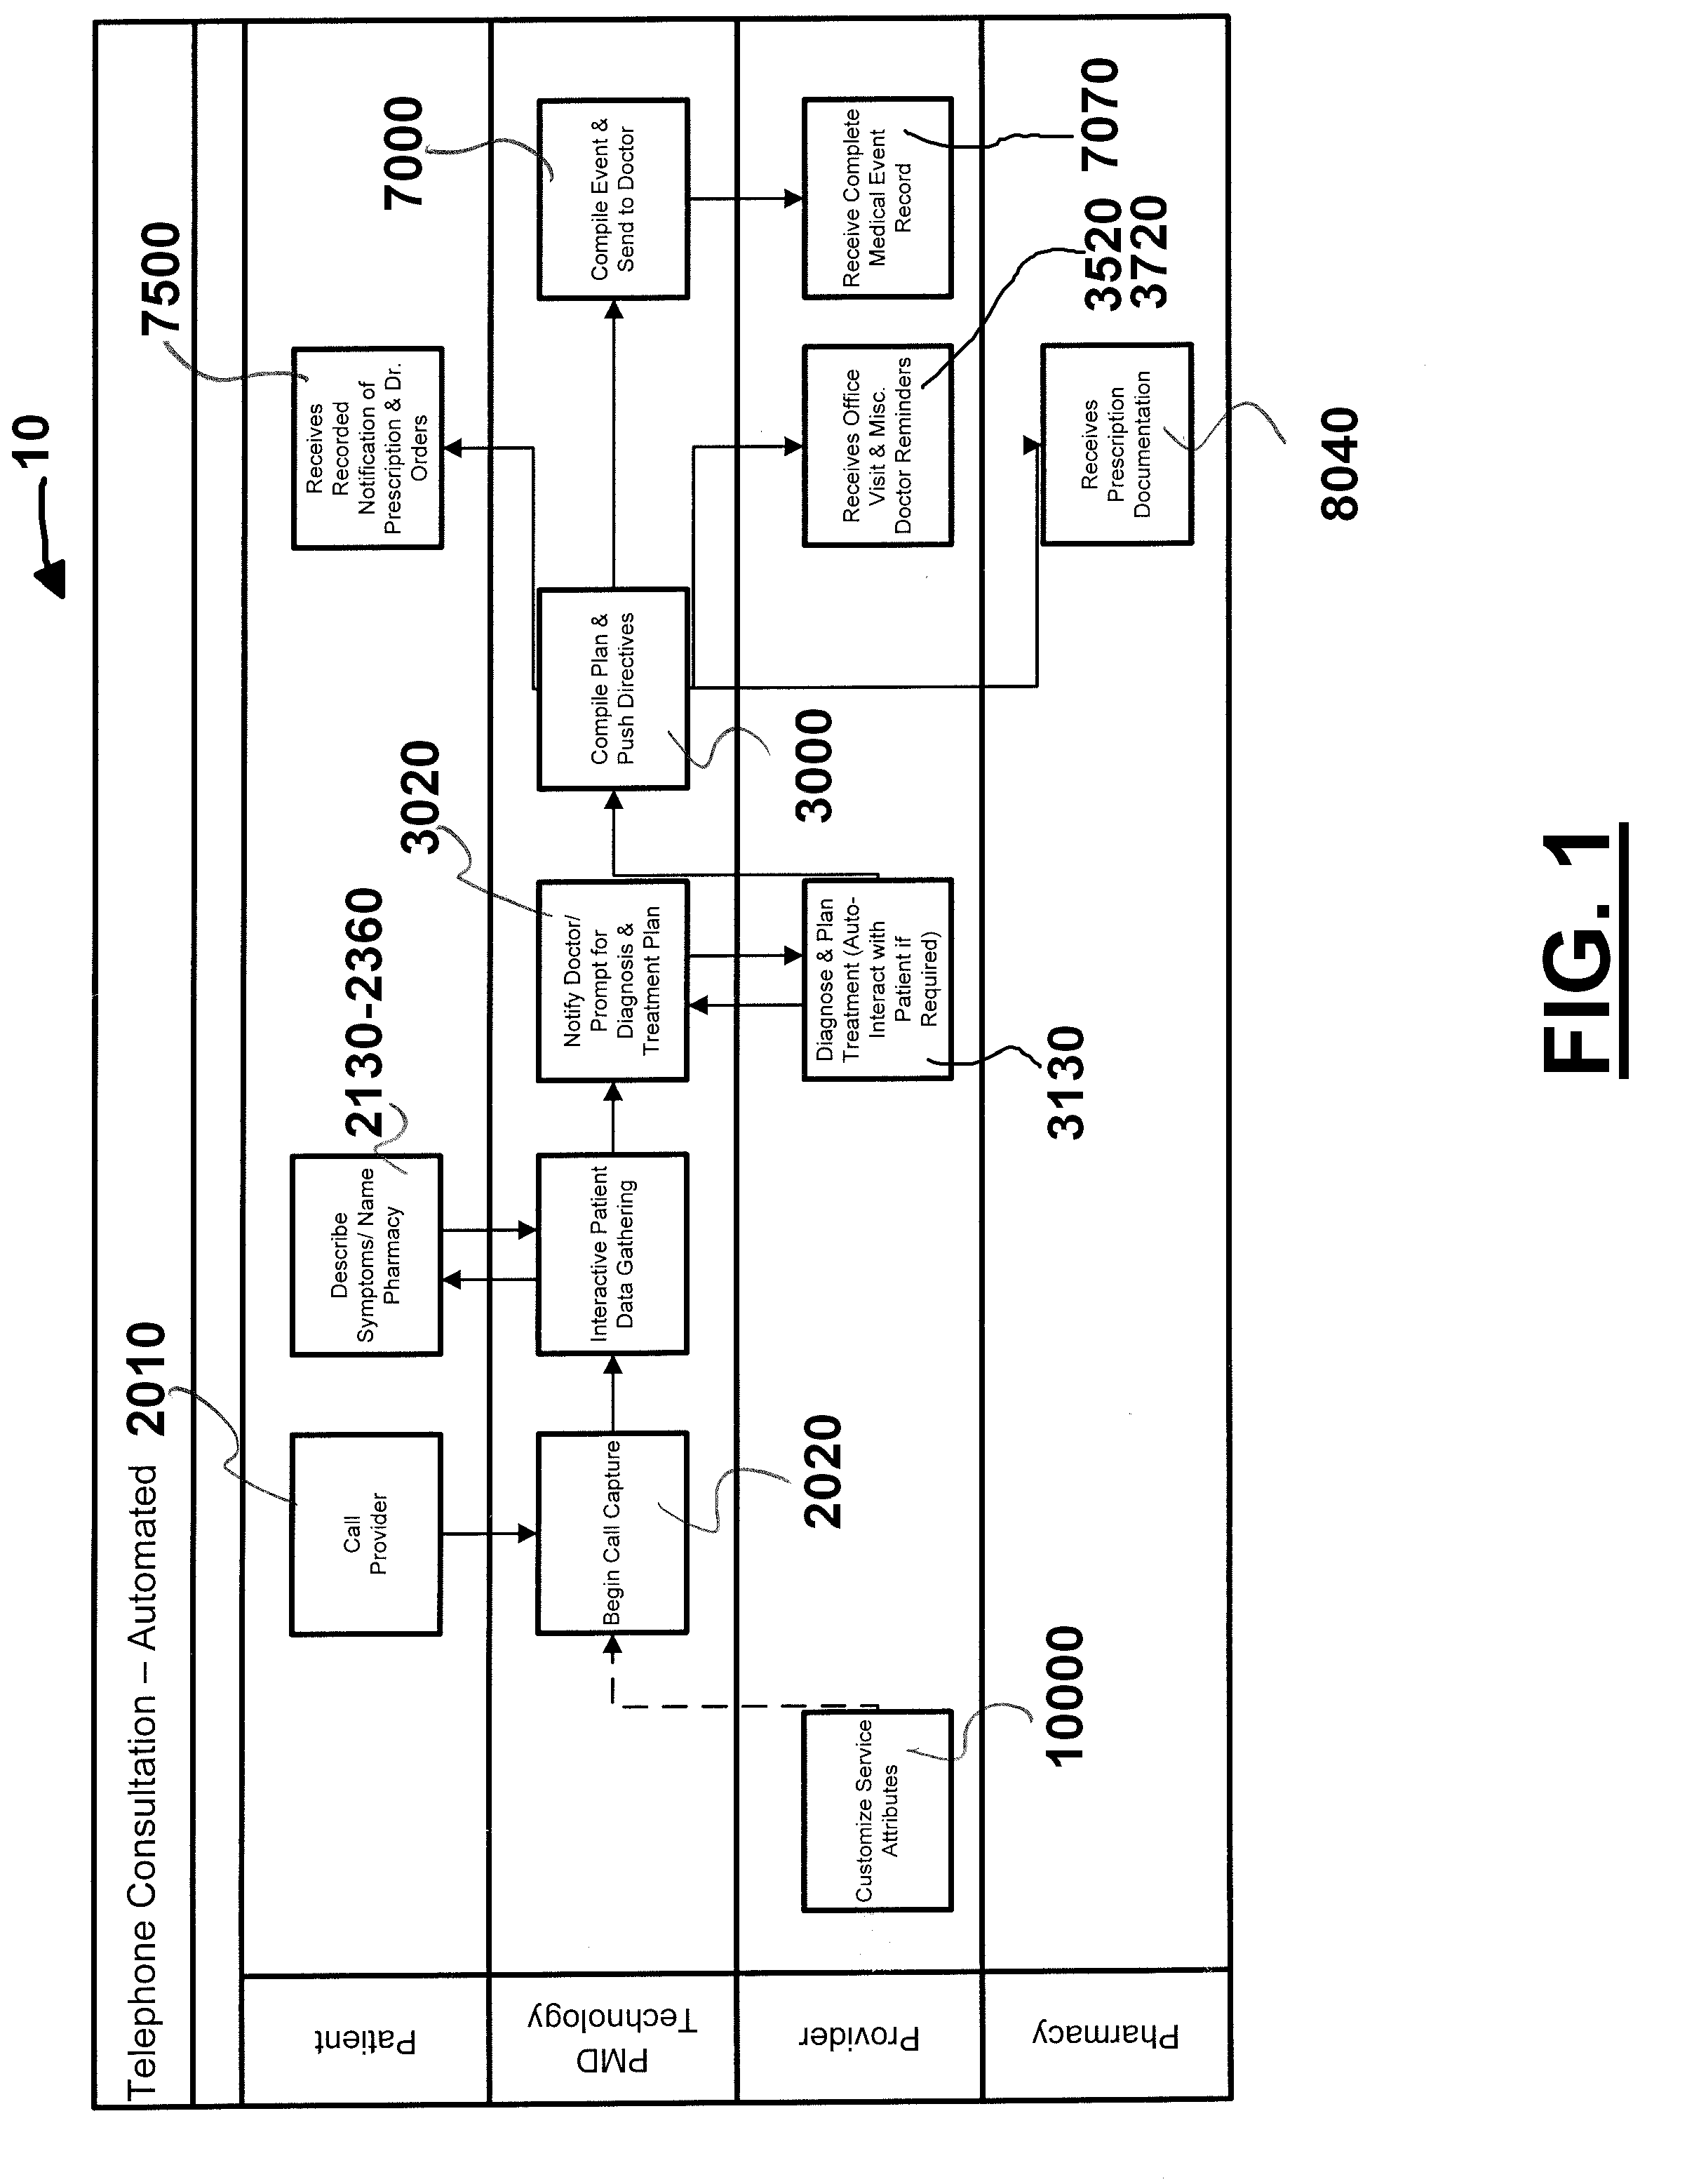 Method and apparatus for indirect medical consultation